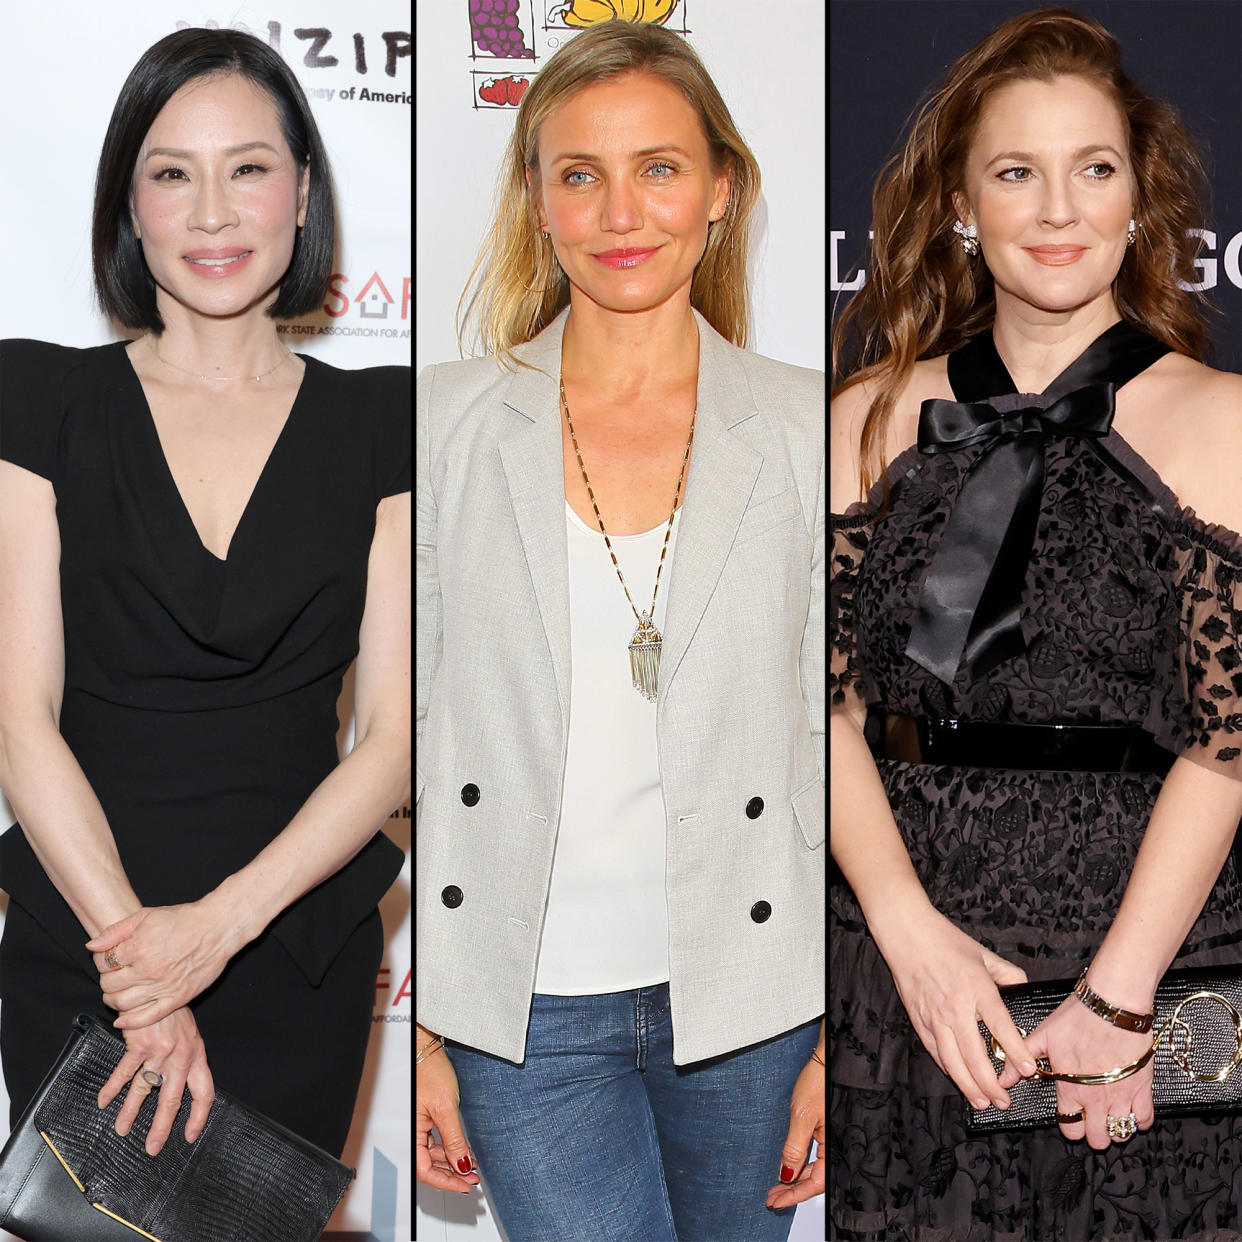 Charlie-s Angels Director McG Teases Sequel With Lucy Liu Cameron Diaz and Drew Barrymore